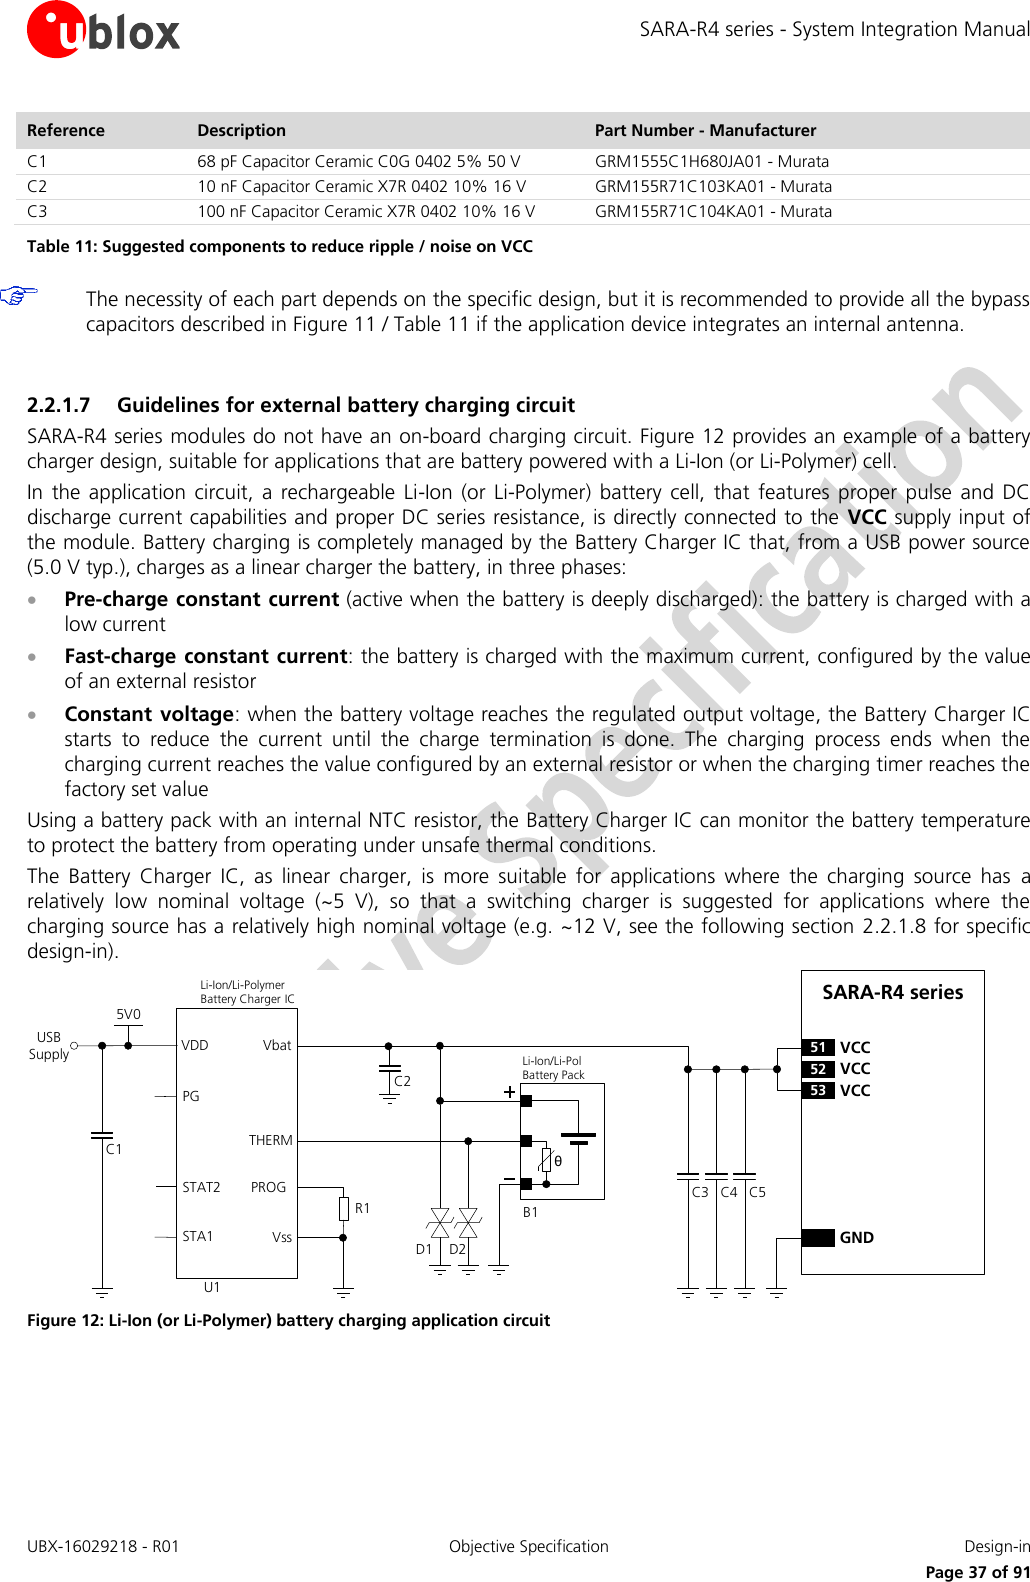 SARA-R4 series - System Integration Manual UBX-16029218 - R01  Objective Specification  Design-in     Page 37 of 91 Reference Description Part Number - Manufacturer C1 68 pF Capacitor Ceramic C0G 0402 5% 50 V GRM1555C1H680JA01 - Murata C2 10 nF Capacitor Ceramic X7R 0402 10% 16 V GRM155R71C103KA01 - Murata C3 100 nF Capacitor Ceramic X7R 0402 10% 16 V GRM155R71C104KA01 - Murata Table 11: Suggested components to reduce ripple / noise on VCC   The necessity of each part depends on the specific design, but it is recommended to provide all the bypass capacitors described in Figure 11 / Table 11 if the application device integrates an internal antenna.  2.2.1.7 Guidelines for external battery charging circuit SARA-R4 series modules do not have an on-board charging circuit. Figure 12 provides an example of a battery charger design, suitable for applications that are battery powered with a Li-Ion (or Li-Polymer) cell. In  the application  circuit,  a  rechargeable  Li-Ion (or  Li-Polymer)  battery  cell,  that  features  proper  pulse  and DC discharge current capabilities and proper DC series resistance, is directly connected to the VCC supply input of the module. Battery charging is completely managed by the Battery Charger IC that, from a USB power source (5.0 V typ.), charges as a linear charger the battery, in three phases:  Pre-charge constant current (active when the battery is deeply discharged): the battery is charged with a low current  Fast-charge constant current: the battery is charged with the maximum current, configured by the value of an external resistor  Constant voltage: when the battery voltage reaches the regulated output voltage, the Battery Charger IC starts  to  reduce  the  current  until  the  charge  termination  is  done.  The  charging  process  ends  when  the charging current reaches the value configured by an external resistor or when the charging timer reaches the factory set value Using a battery pack with an internal NTC resistor, the Battery Charger IC can monitor the battery temperature to protect the battery from operating under unsafe thermal conditions. The  Battery  Charger  IC,  as  linear  charger,  is  more  suitable  for  applications  where  the  charging  source  has  a relatively  low  nominal  voltage  (~5  V),  so  that  a  switching  charger  is  suggested  for  applications  where  the charging source has a relatively high nominal voltage (e.g. ~12 V, see the following section  2.2.1.8 for specific design-in). C4C3 C5GNDSARA-R4 series52 VCC53 VCC51 VCCUSB SupplyθU1PGSTAT2STA1VDDC15V0THERMVssVbatLi-Ion/Li-Pol Battery PackD1B1C2Li-Ion/Li-Polymer    Battery Charger ICD2PROGR1 Figure 12: Li-Ion (or Li-Polymer) battery charging application circuit 